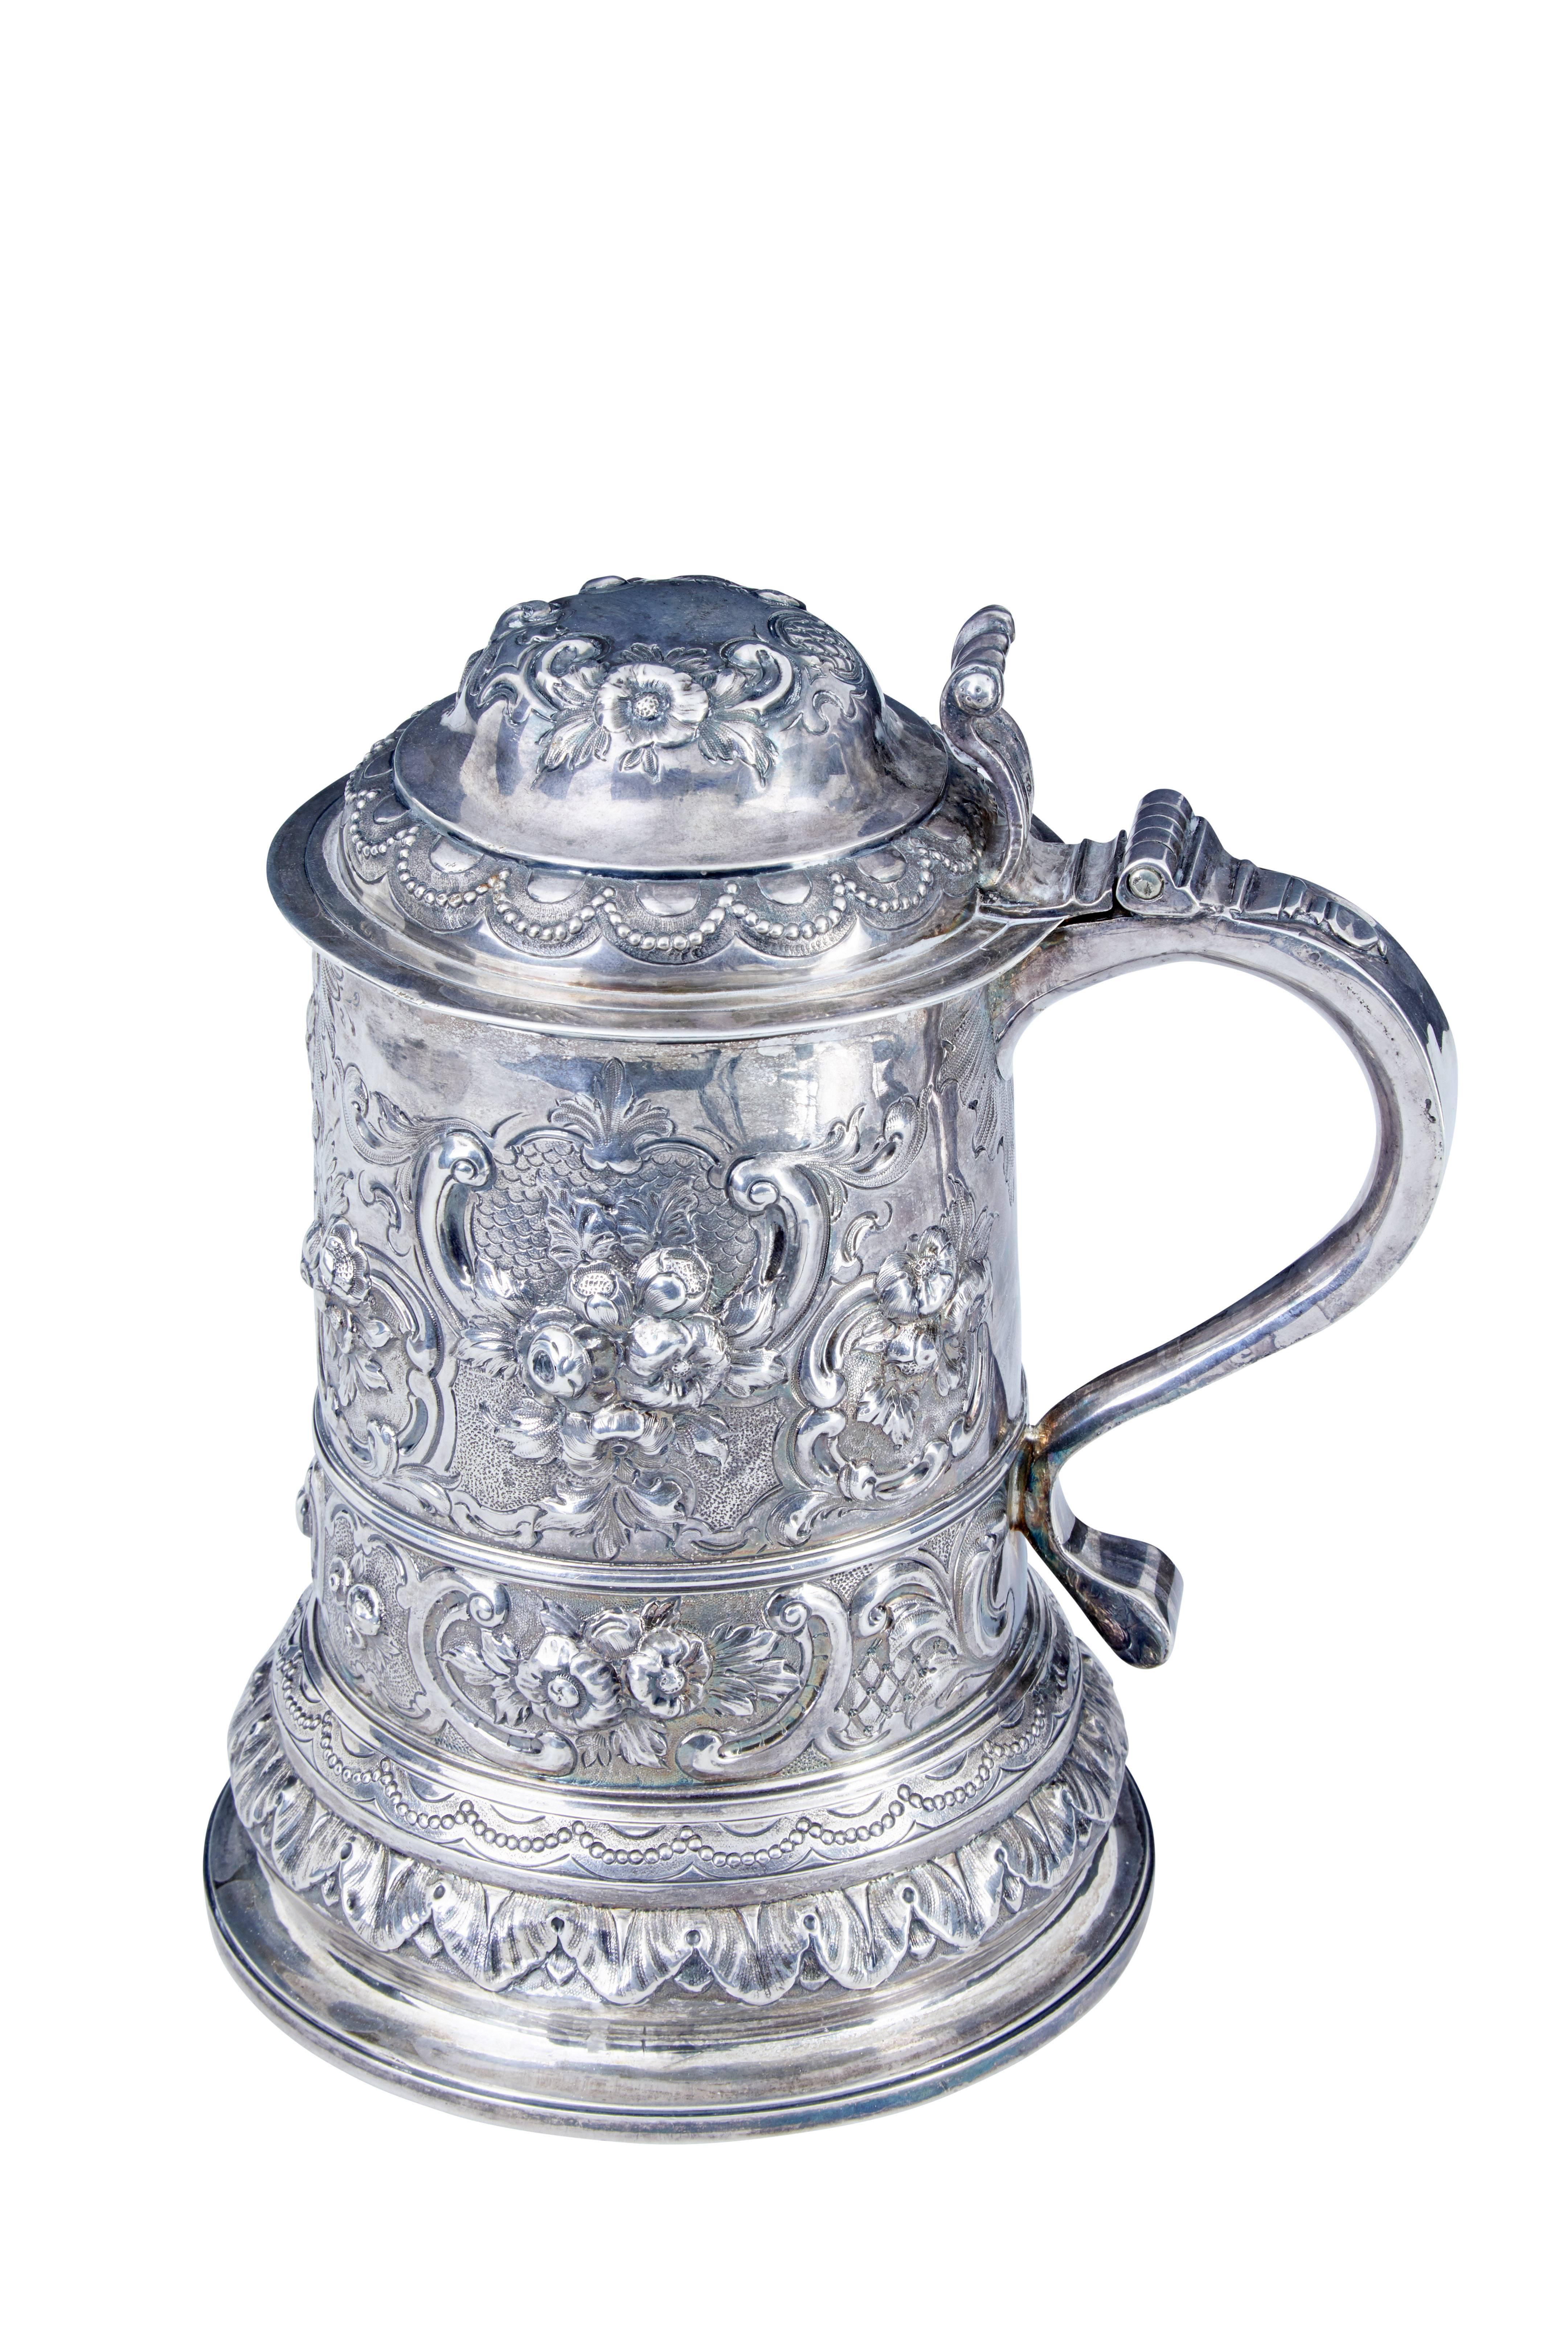 John Penfold (aka Penford) makers mark Rococo silver lidded tankard.
Here we have a beautiful silver lidded tankard in the Rococo style. The interior is gilded and 
overall condition is good.
The tankard bears exterior and interior makers marks